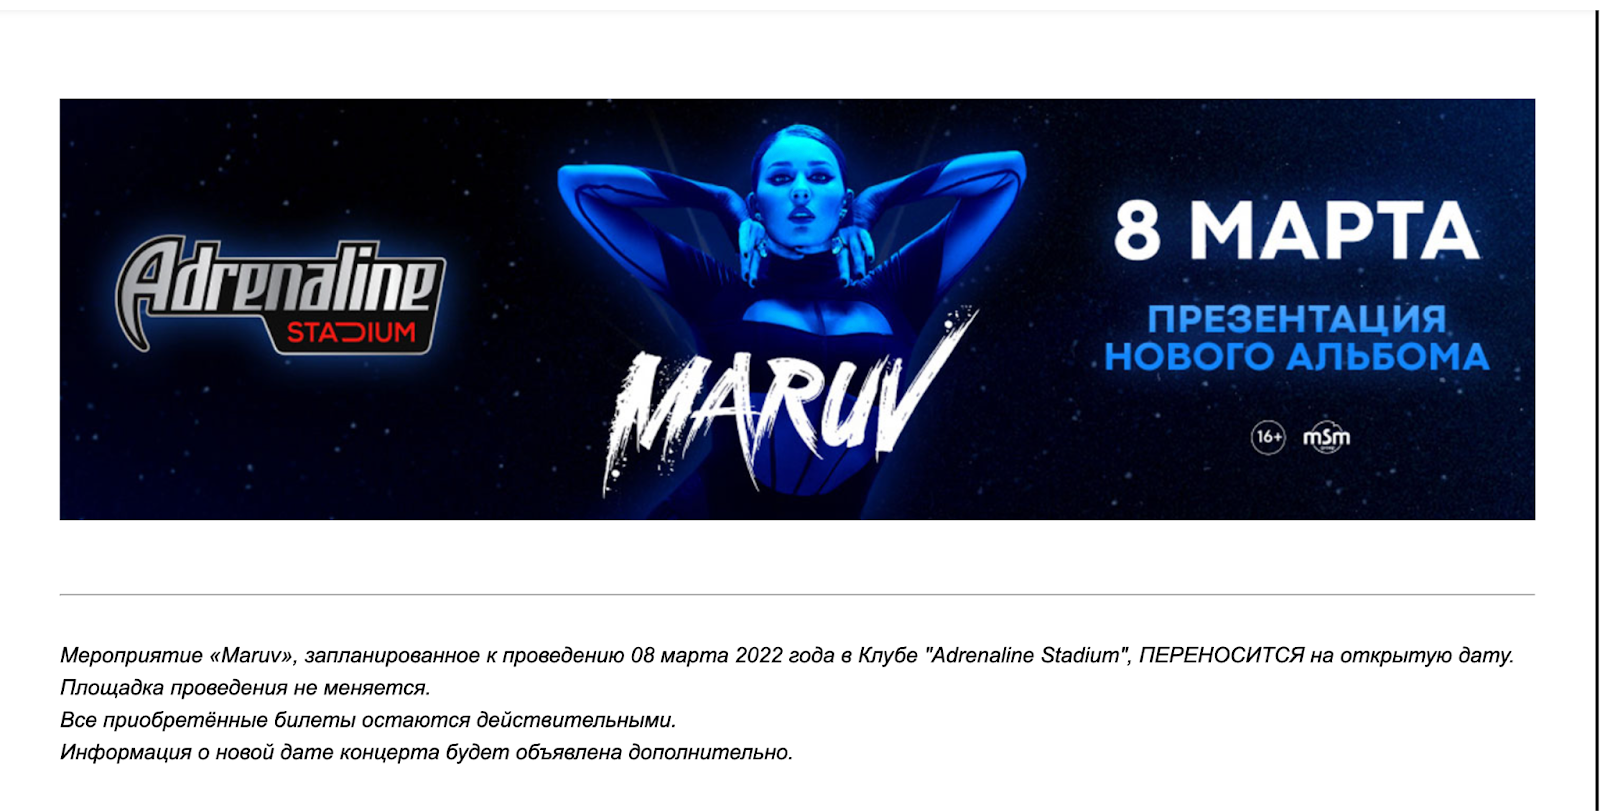 Information from a Russian website about Maruv's concerts